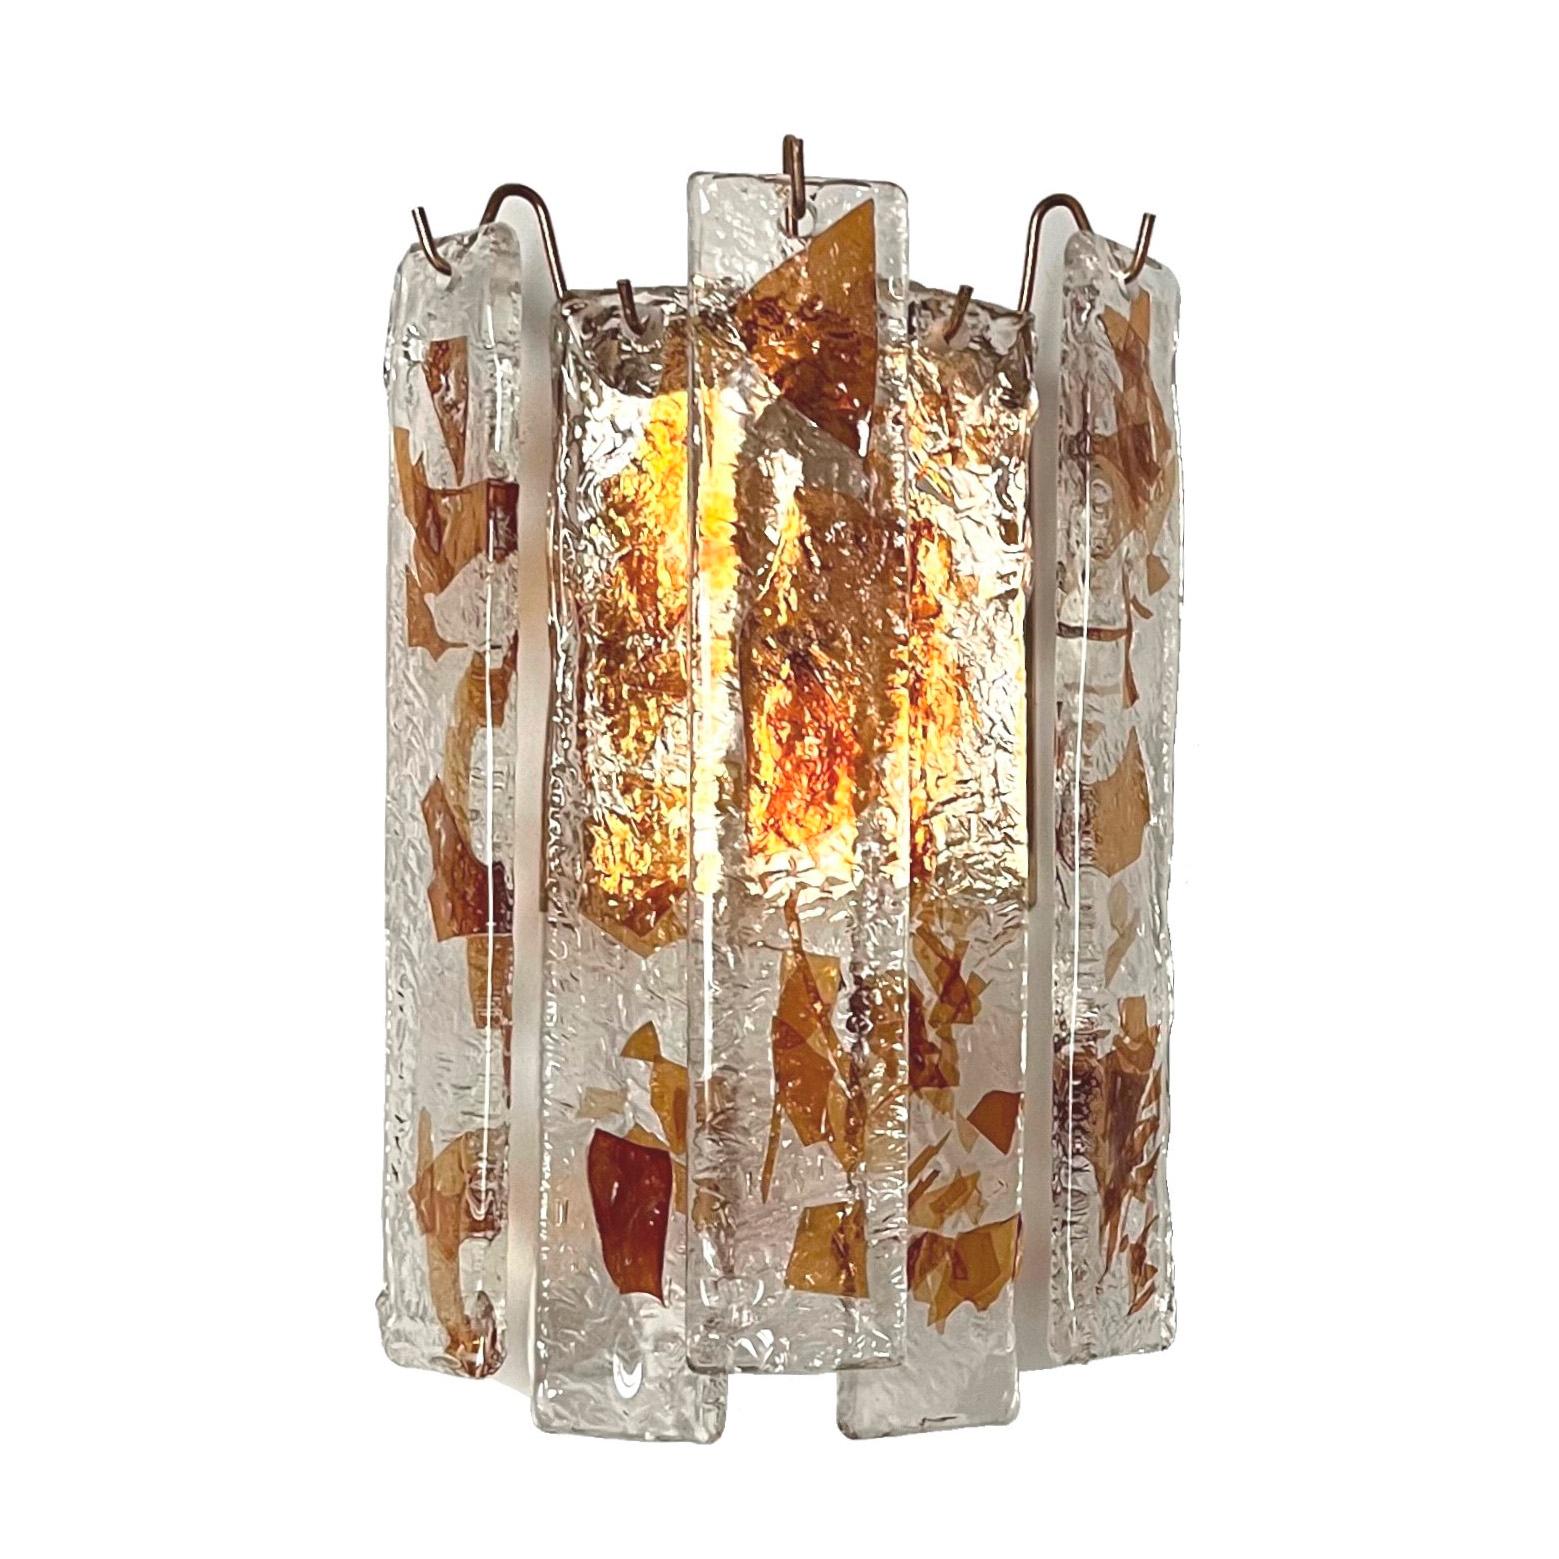 Unique, beautiful and lovely pair of Italian Murano glass wall sconces from 1970s. These fixtures were made during the 1970s in Italy.
Each Sconce is equipped with 1 light socket E27. A professional electrician has checked and prepared the piece to